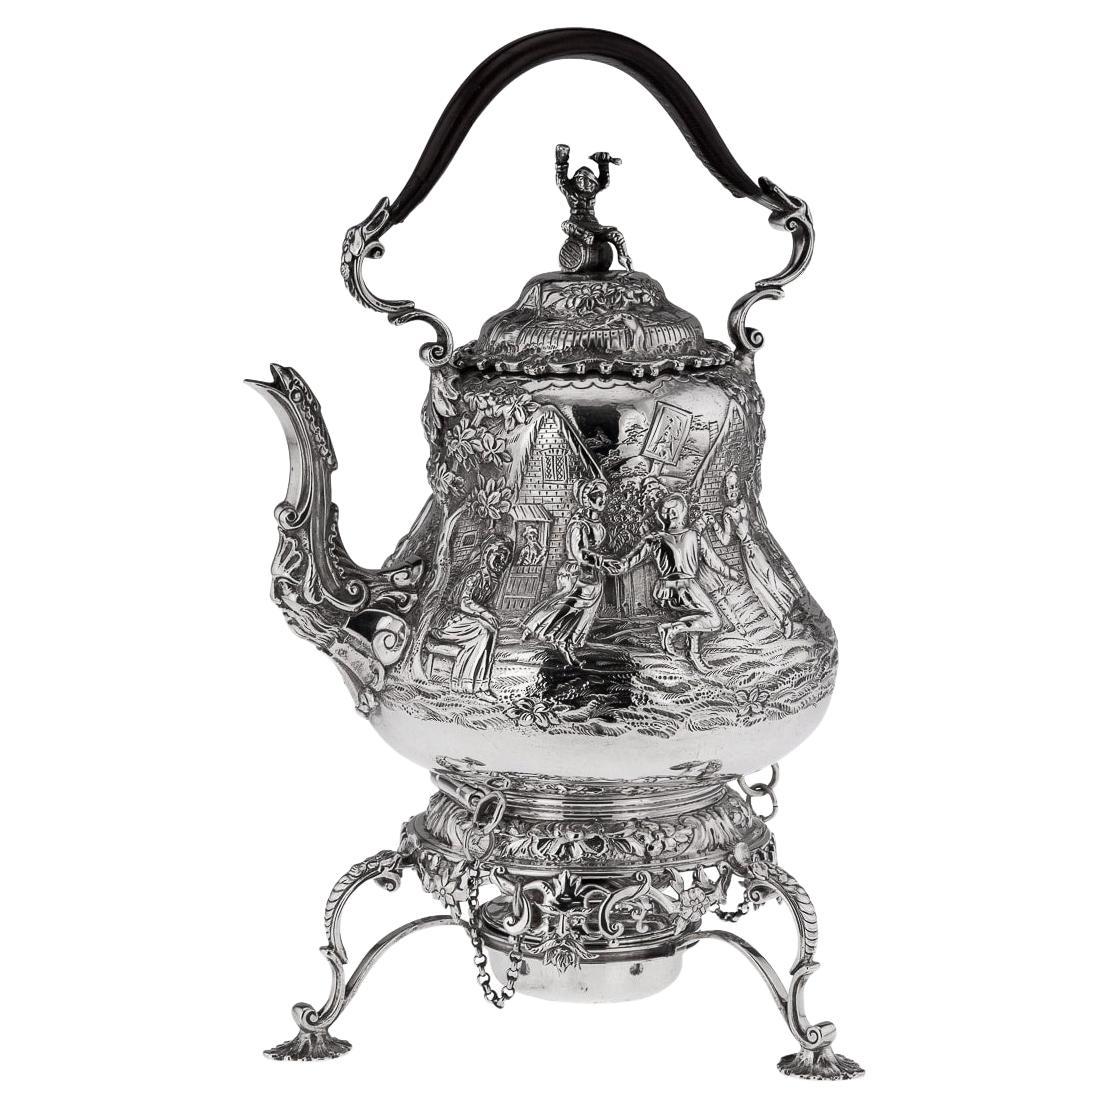 19th Century Victorian Solid Silver Teniers Hot Water Kettle, J Figg, c.1879